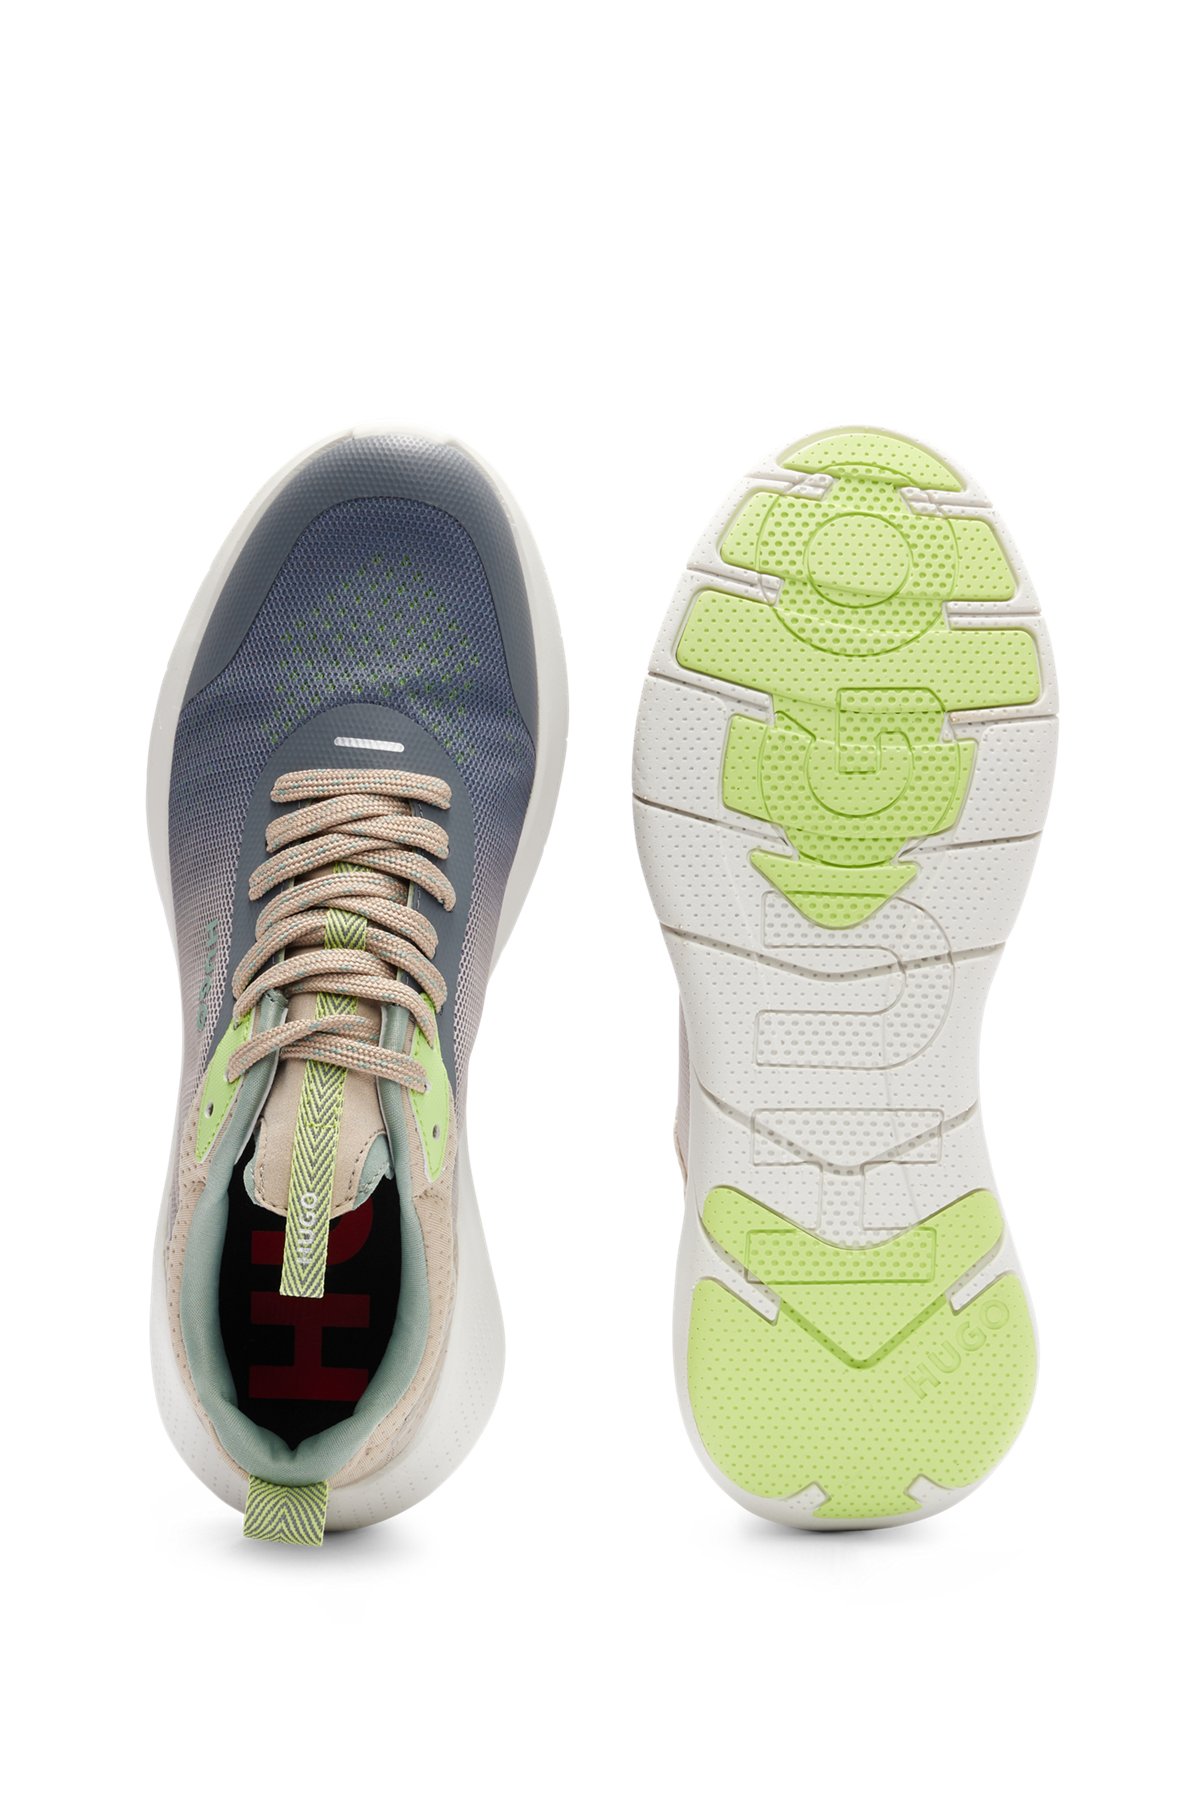 Super-lightweight trainers with layered mesh and microfibre, Light Beige